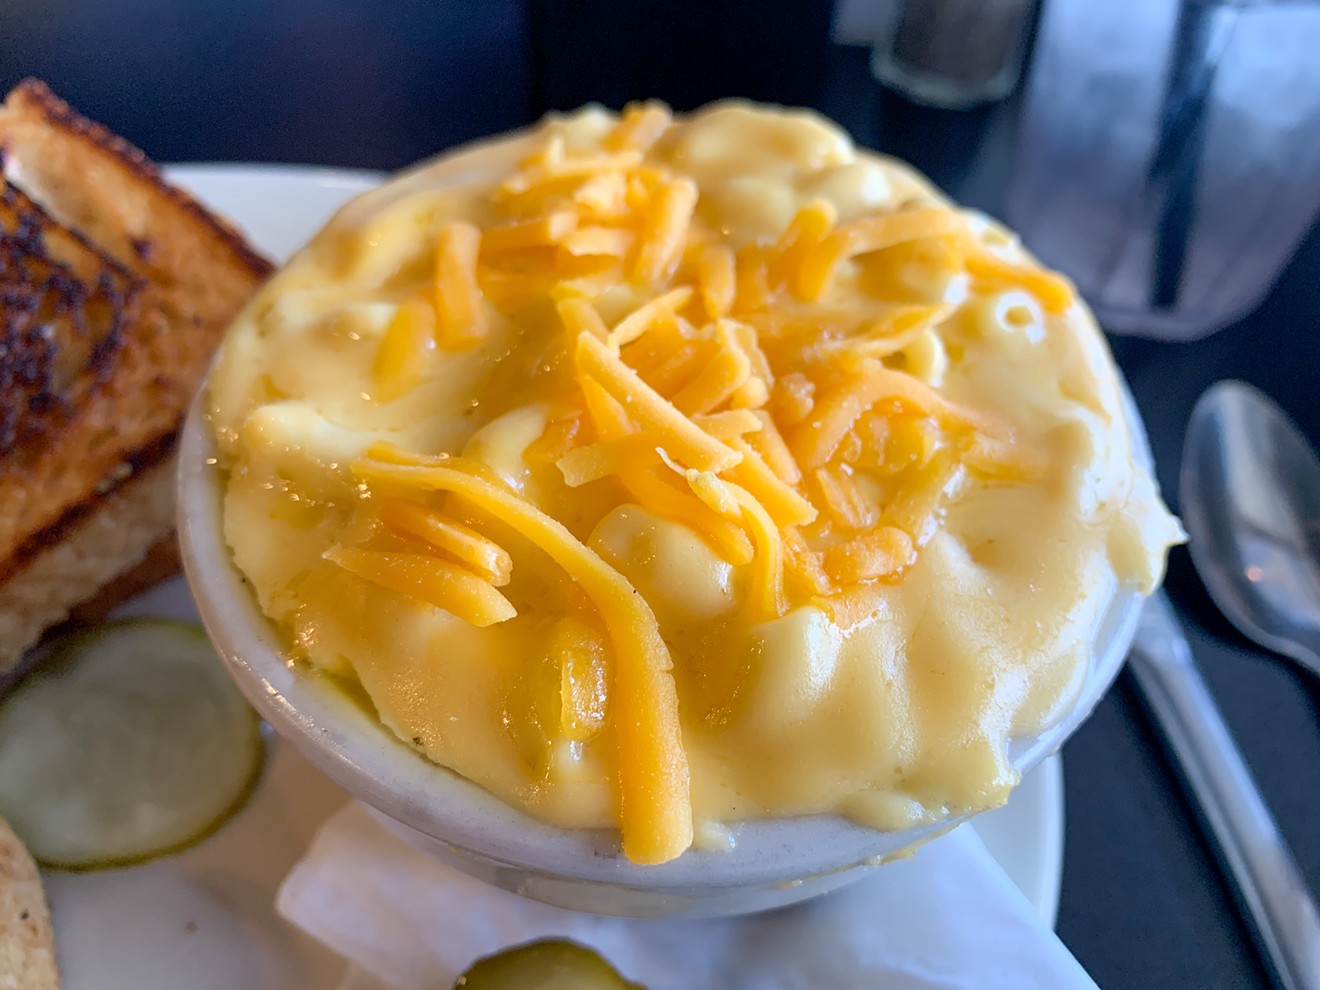 Macaroni and cheese can be even better than you want it to be. At least that's the case with Jonathon's.